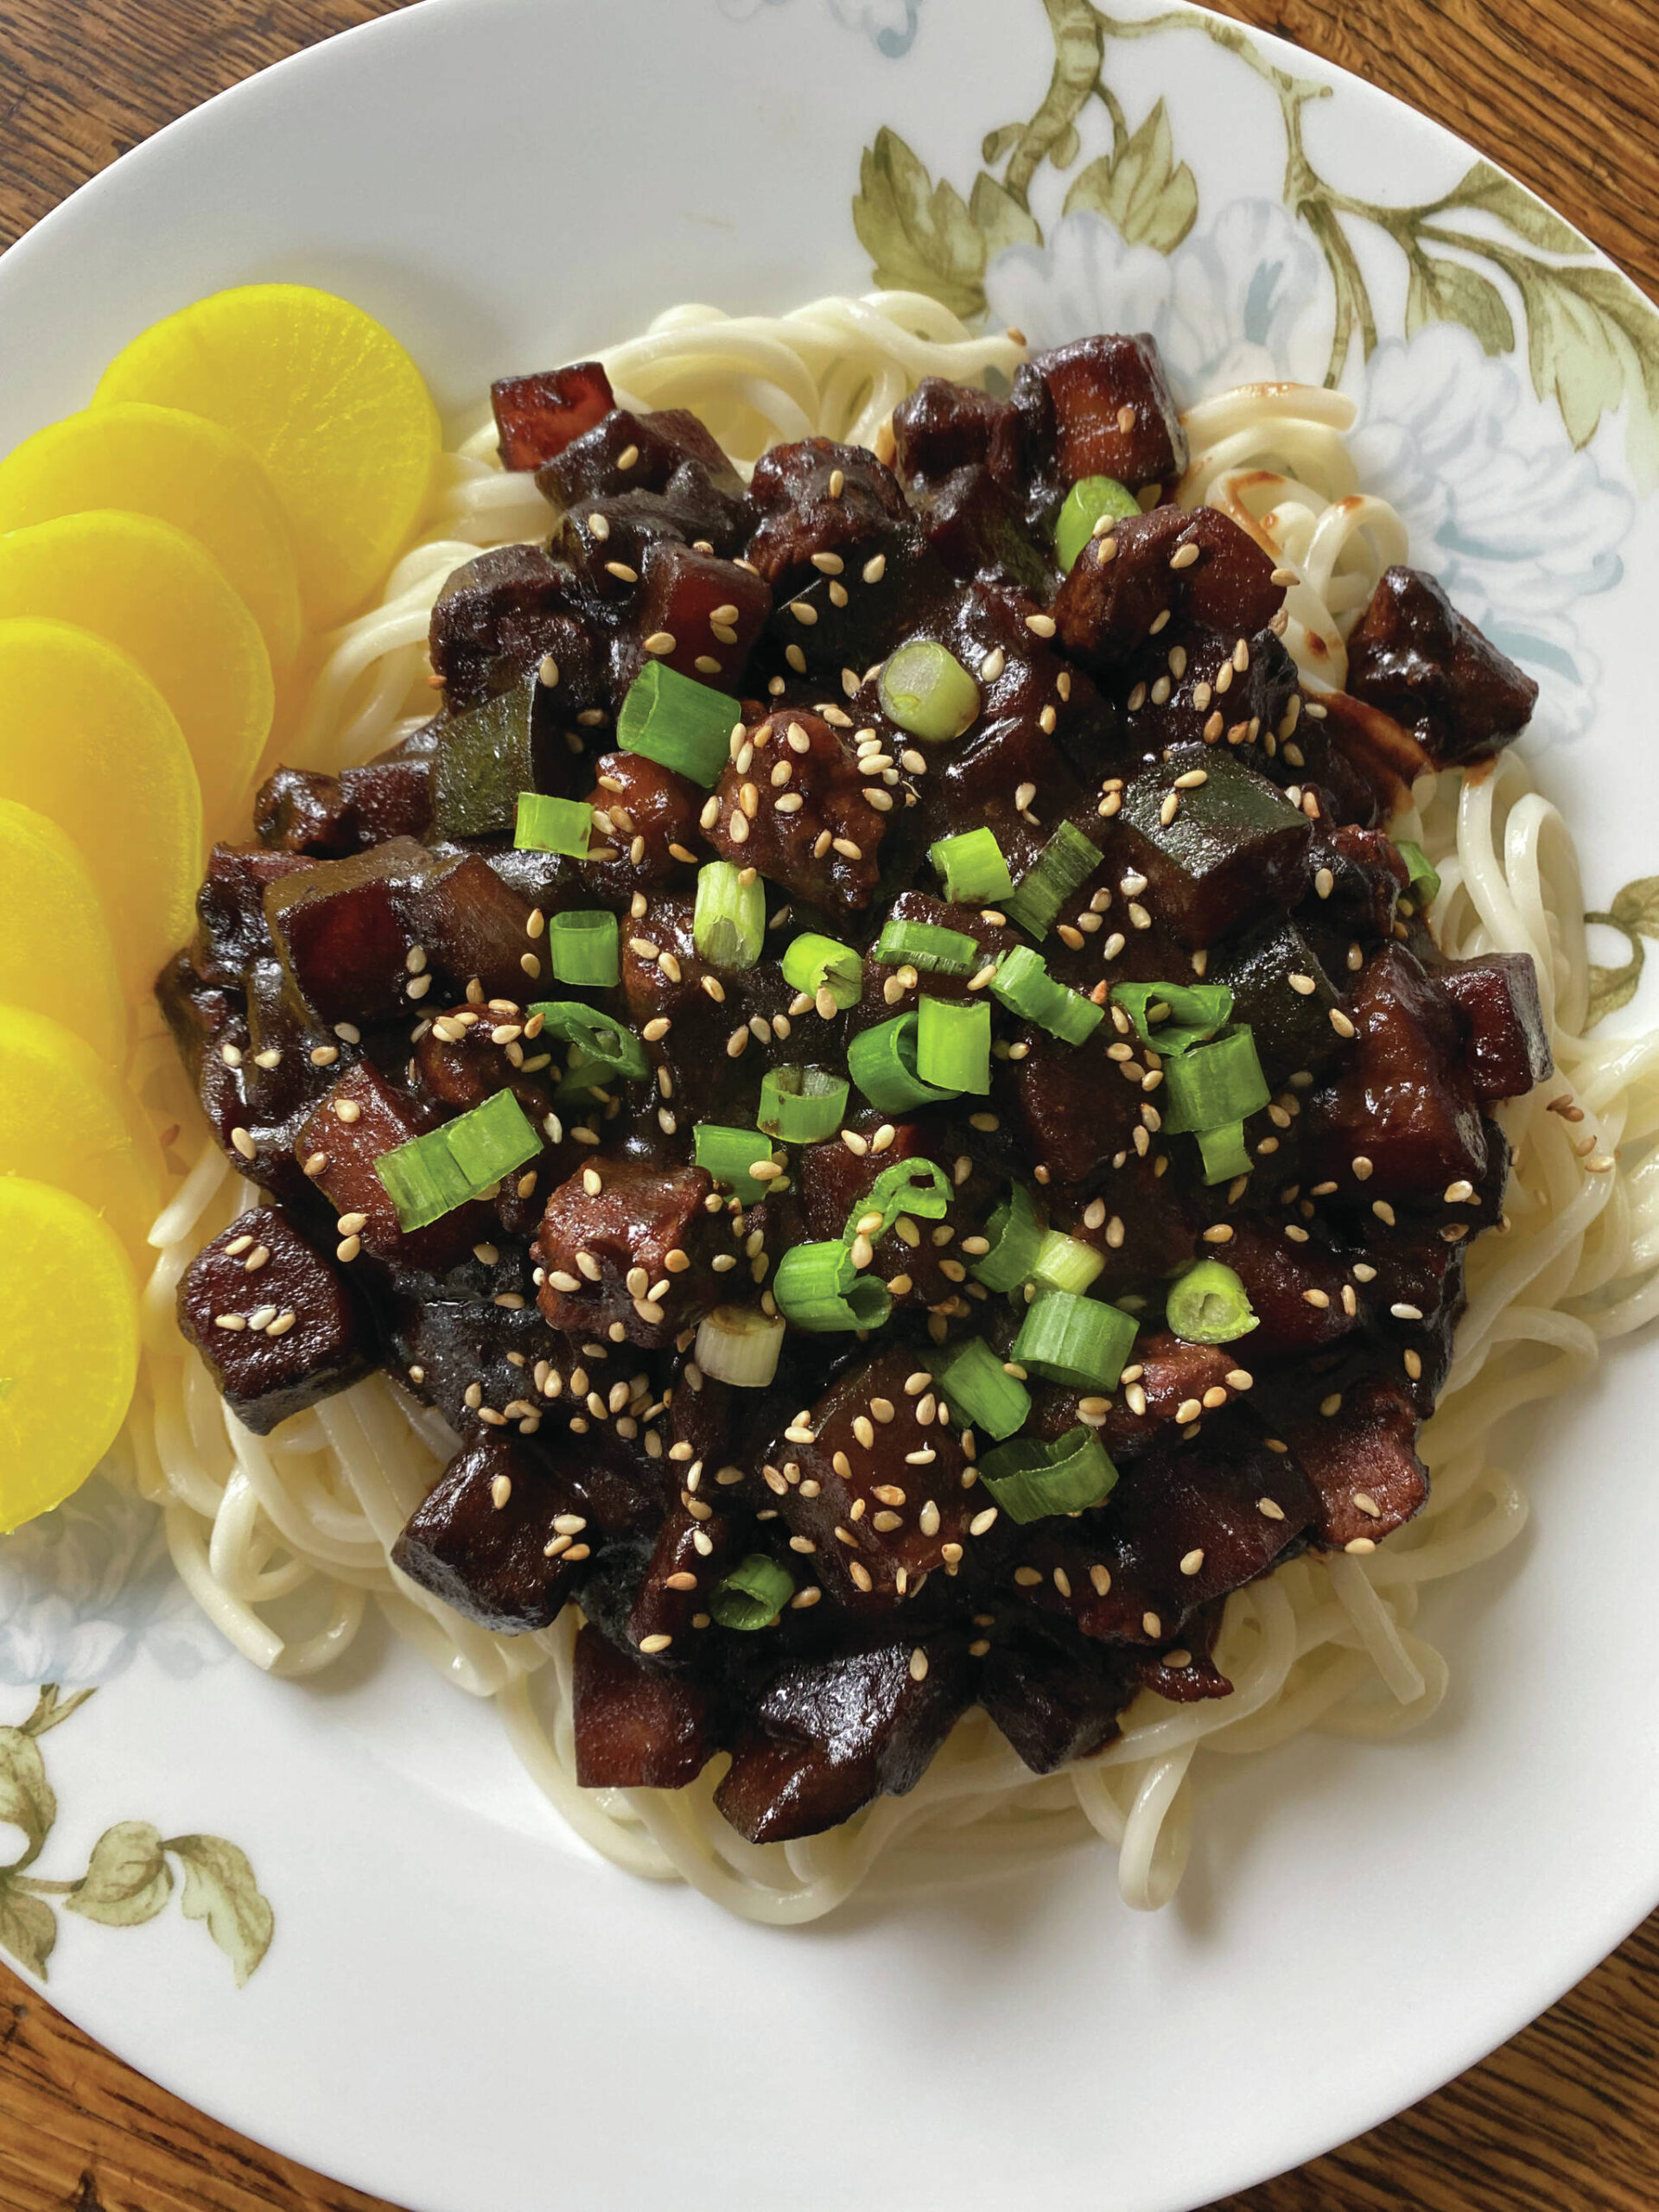 Photo by Tressa Dale/Peninsula Clarion
A favorite of Korean kids and college kids alike, Korean black bean noodles are an everyday takeout staple.